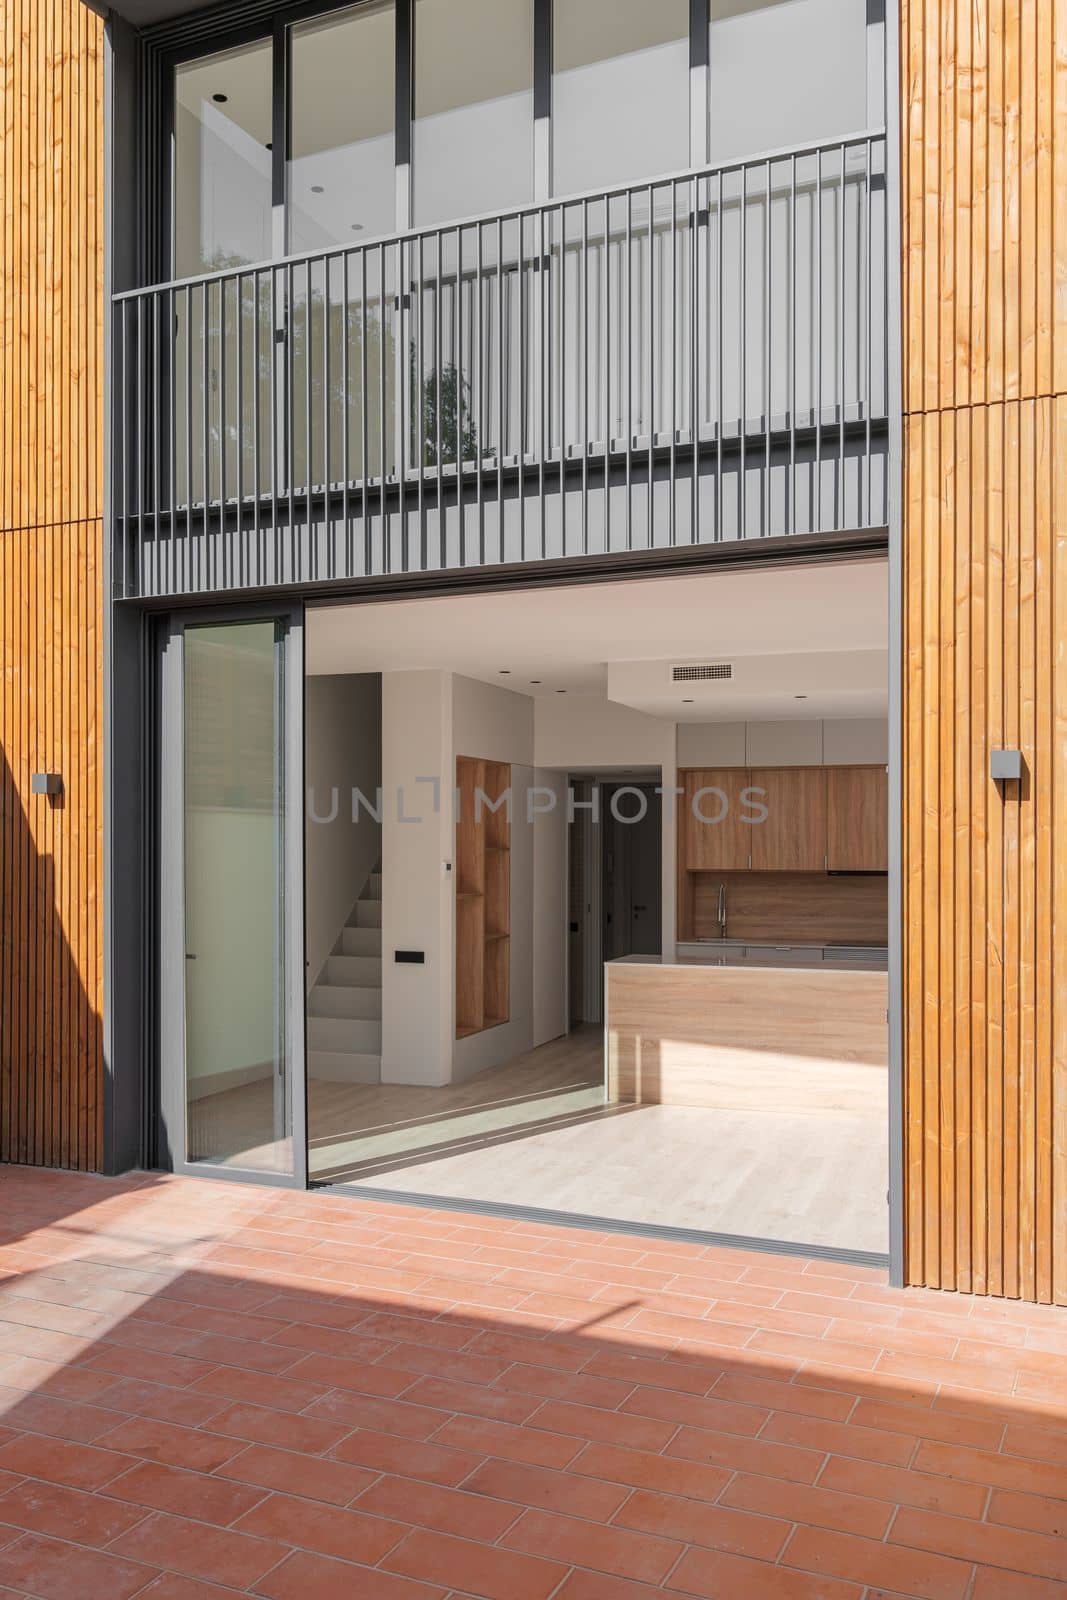 Glass doors in black metal frame open onto house with spacious kitchen with light wooden furniture and staircase to second floor. Doors connect the back of the house and the patio